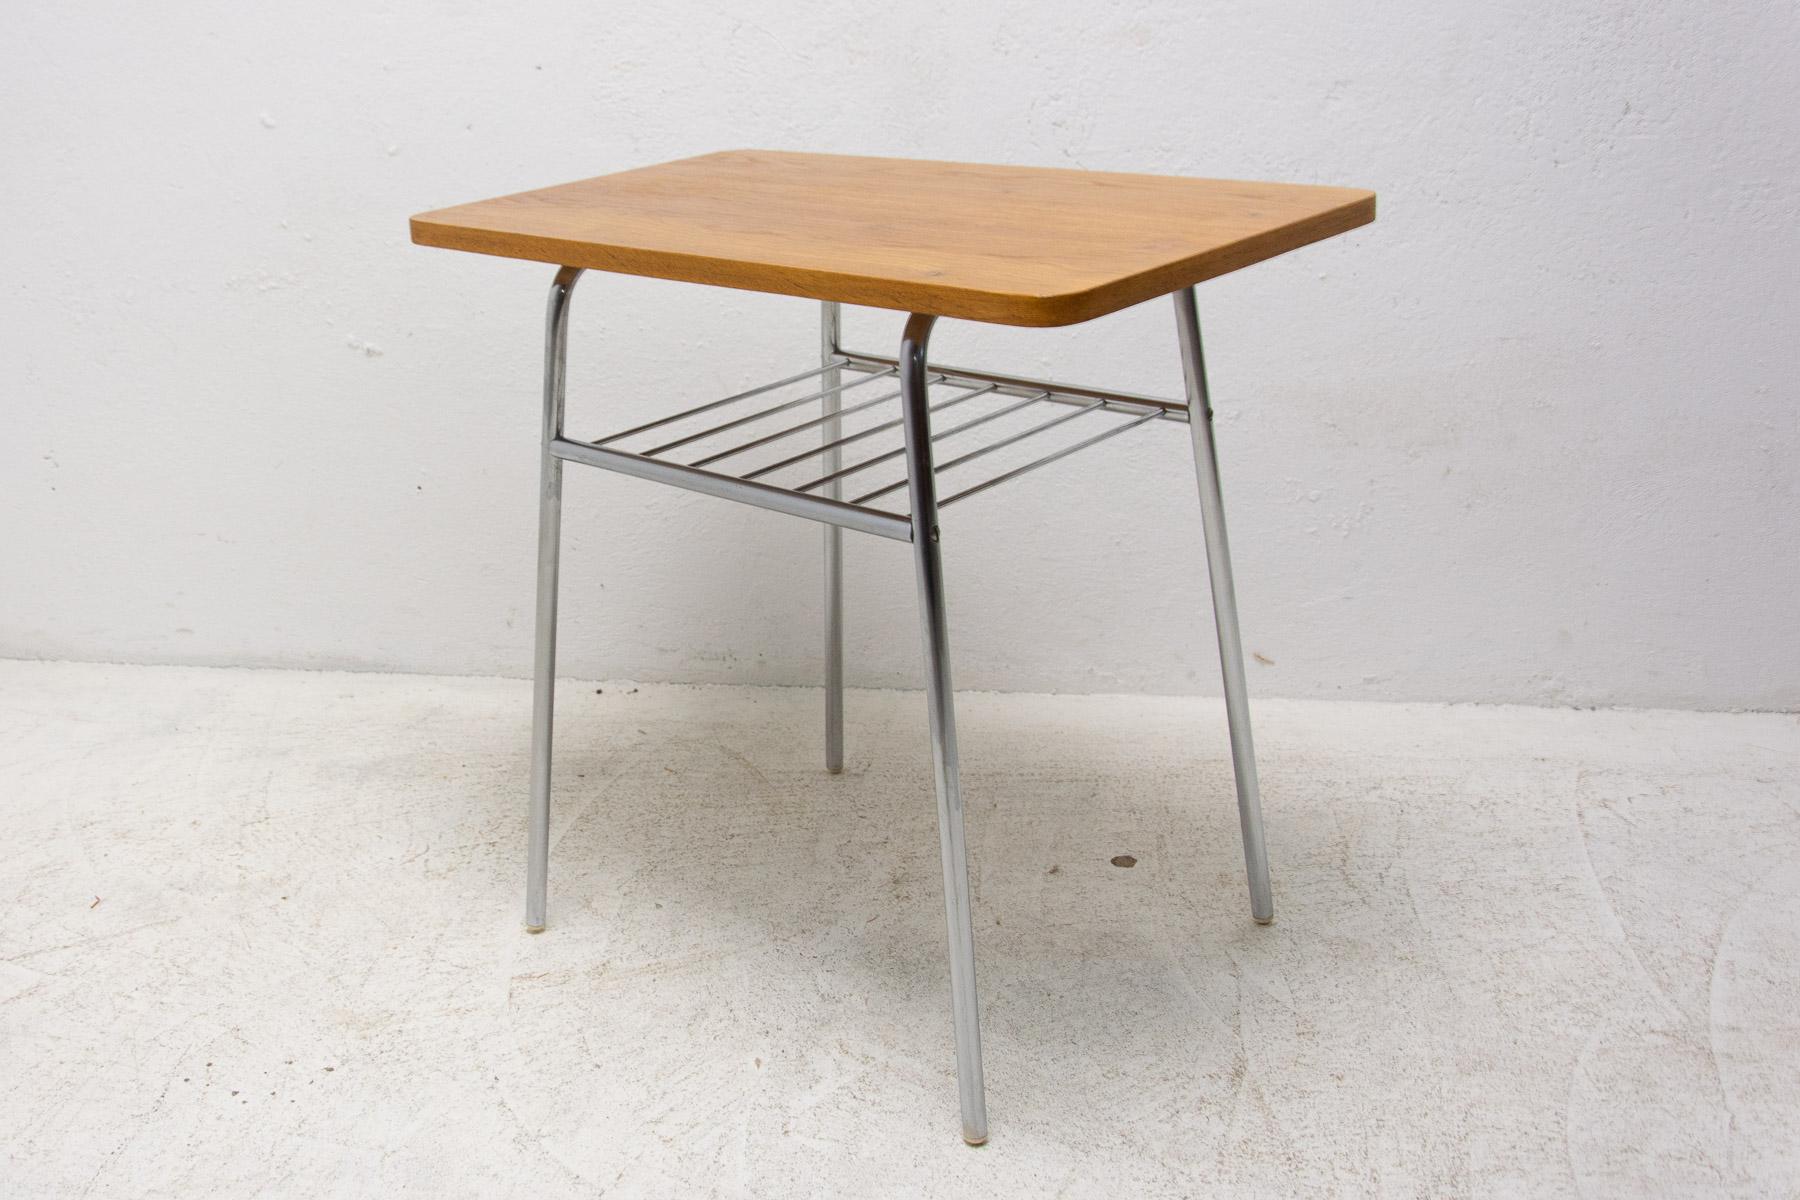 Bauhaus Fully Renovated Chrome and Wood Side Table, 1950s, Czechoslovakia For Sale